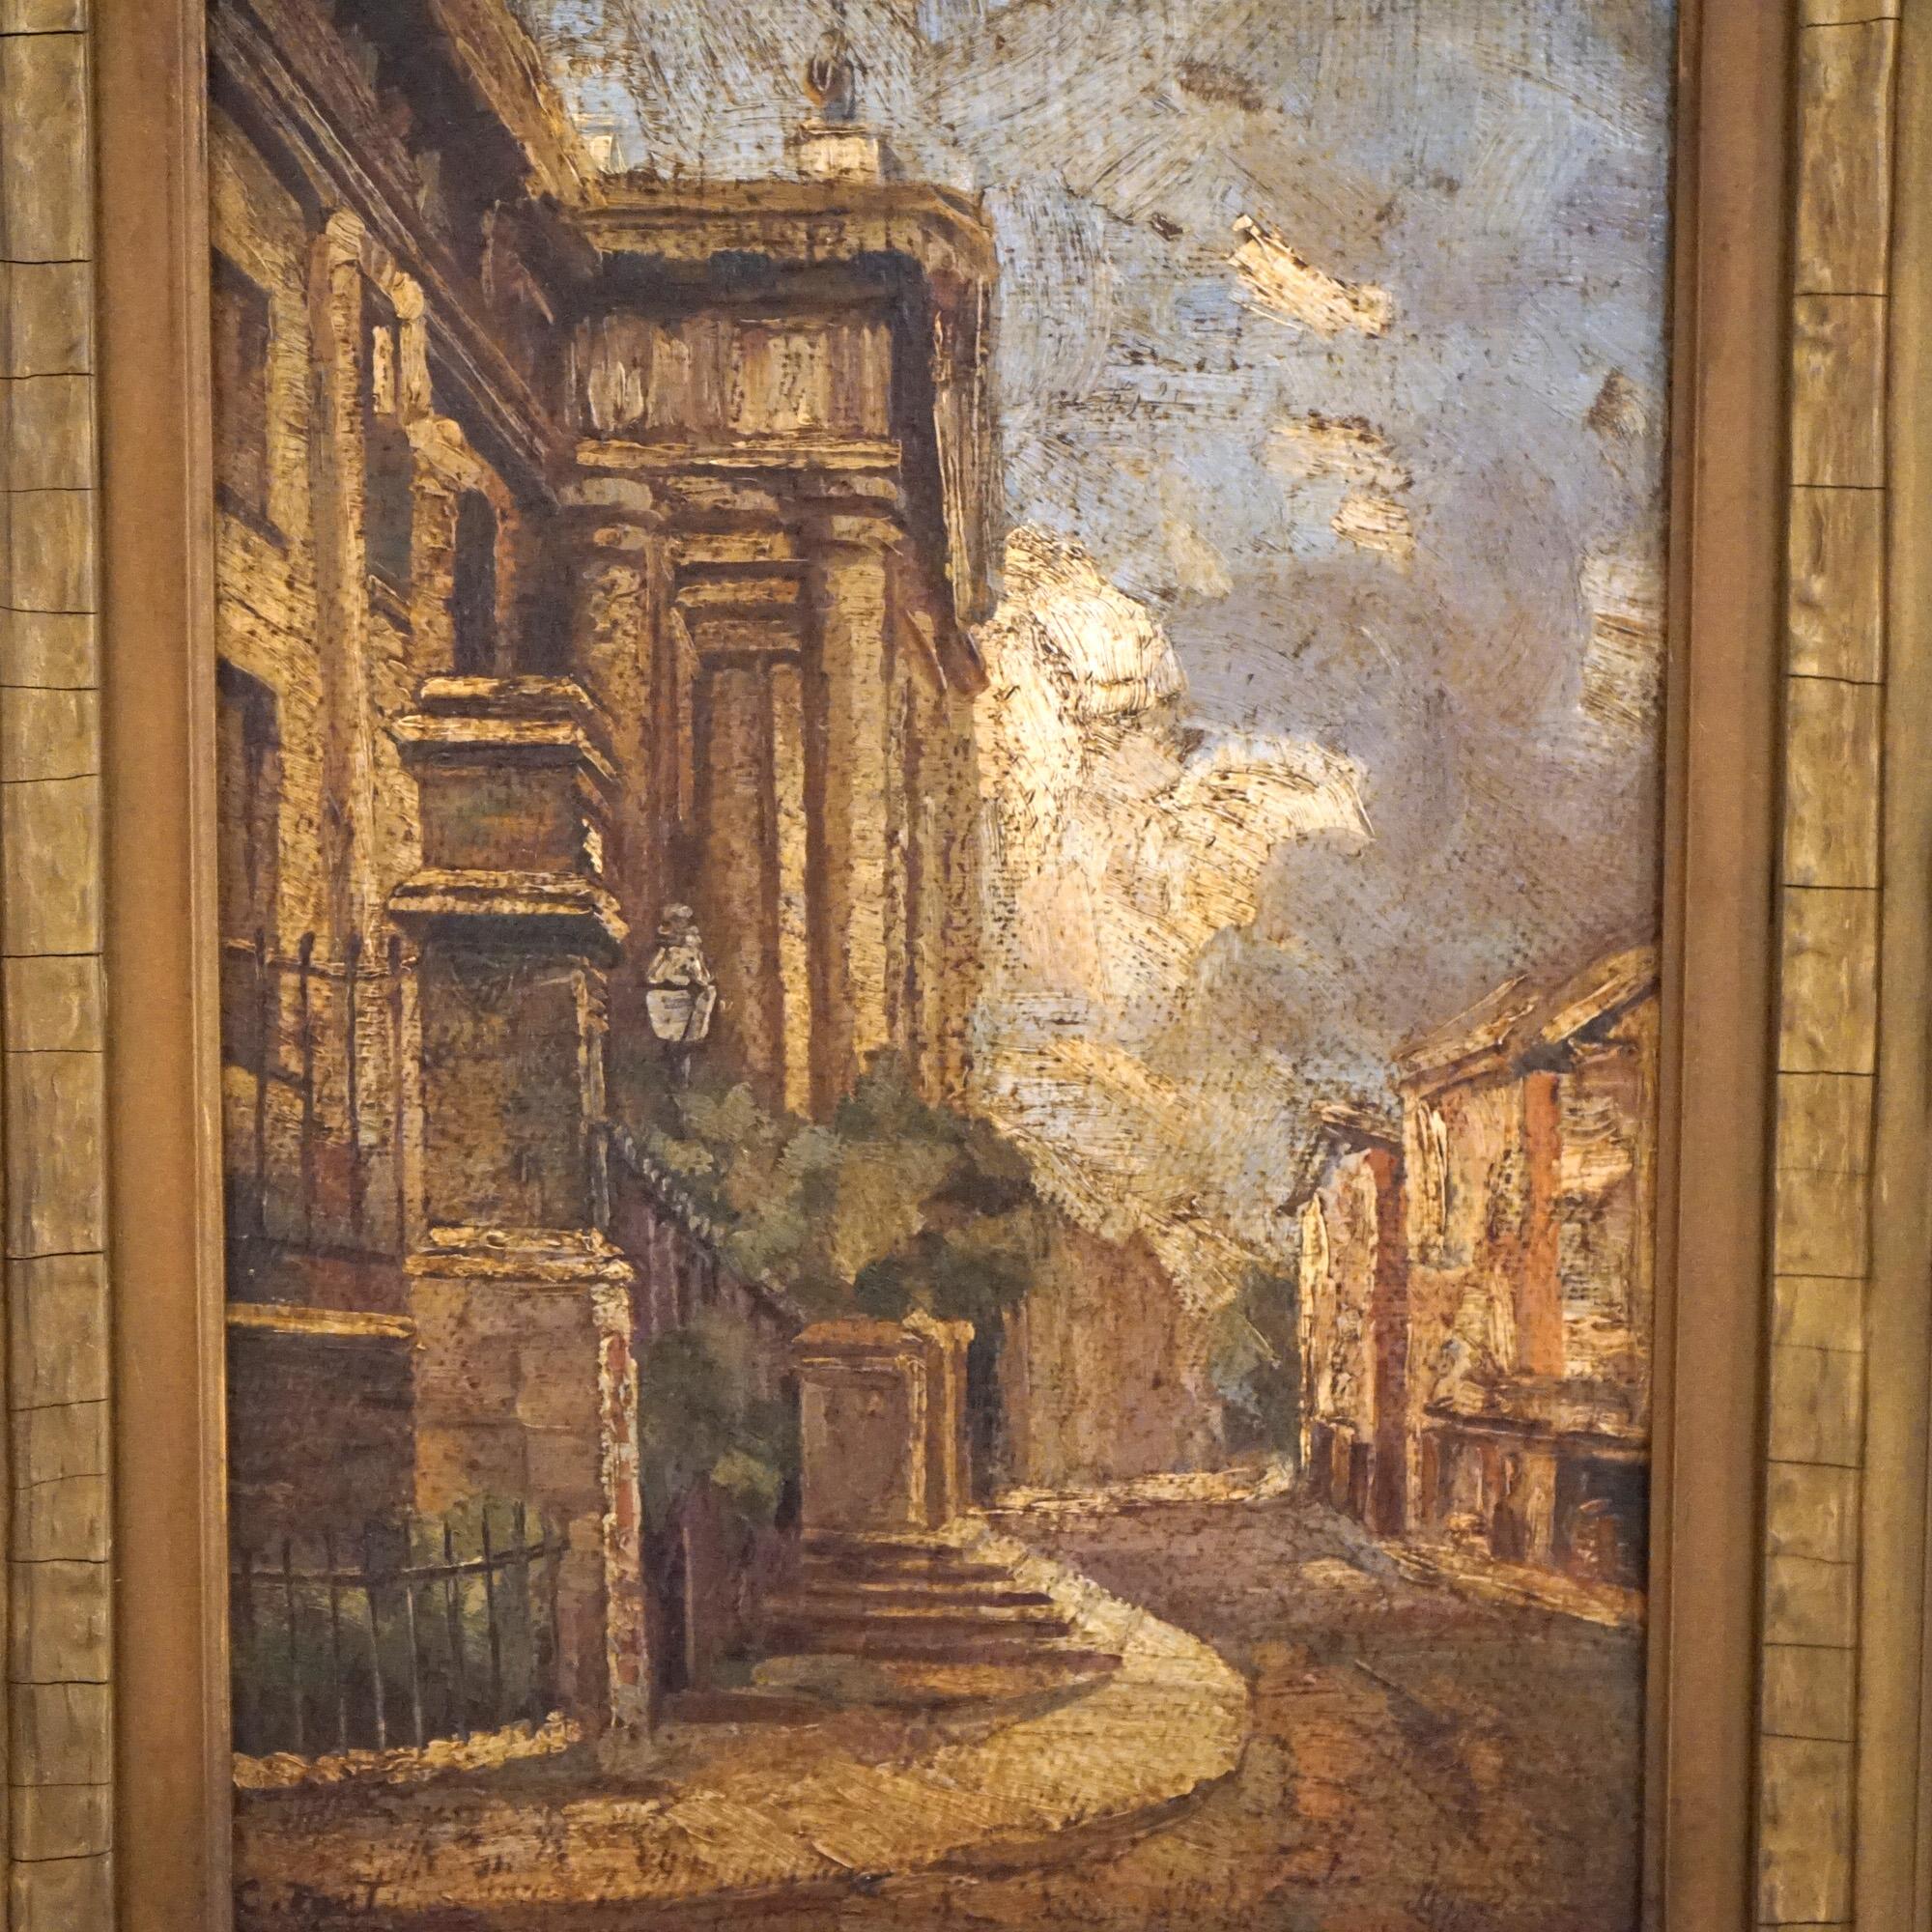 An antique painting offers an impressionist oil on panel painting of an Italian street scene with structures and winding road, artist signed illegible, c1900

Measures- 22.5''H x 18.5''W x 3''D; 10'' x 14.25'' sight